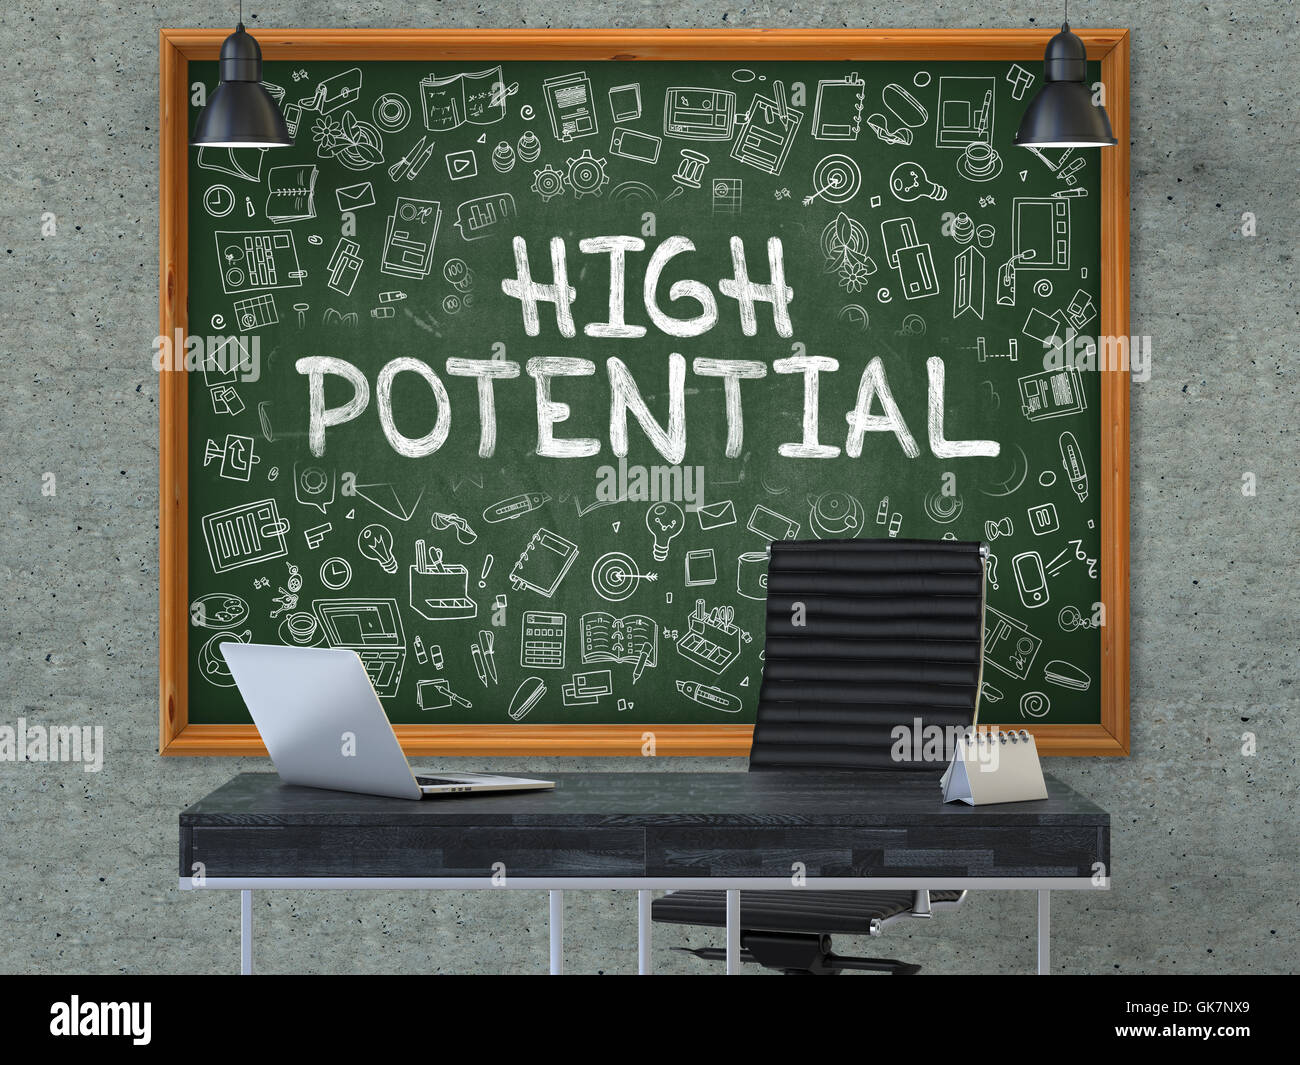 High Potential - Hand Drawn on Green Chalkboard. Stock Photo